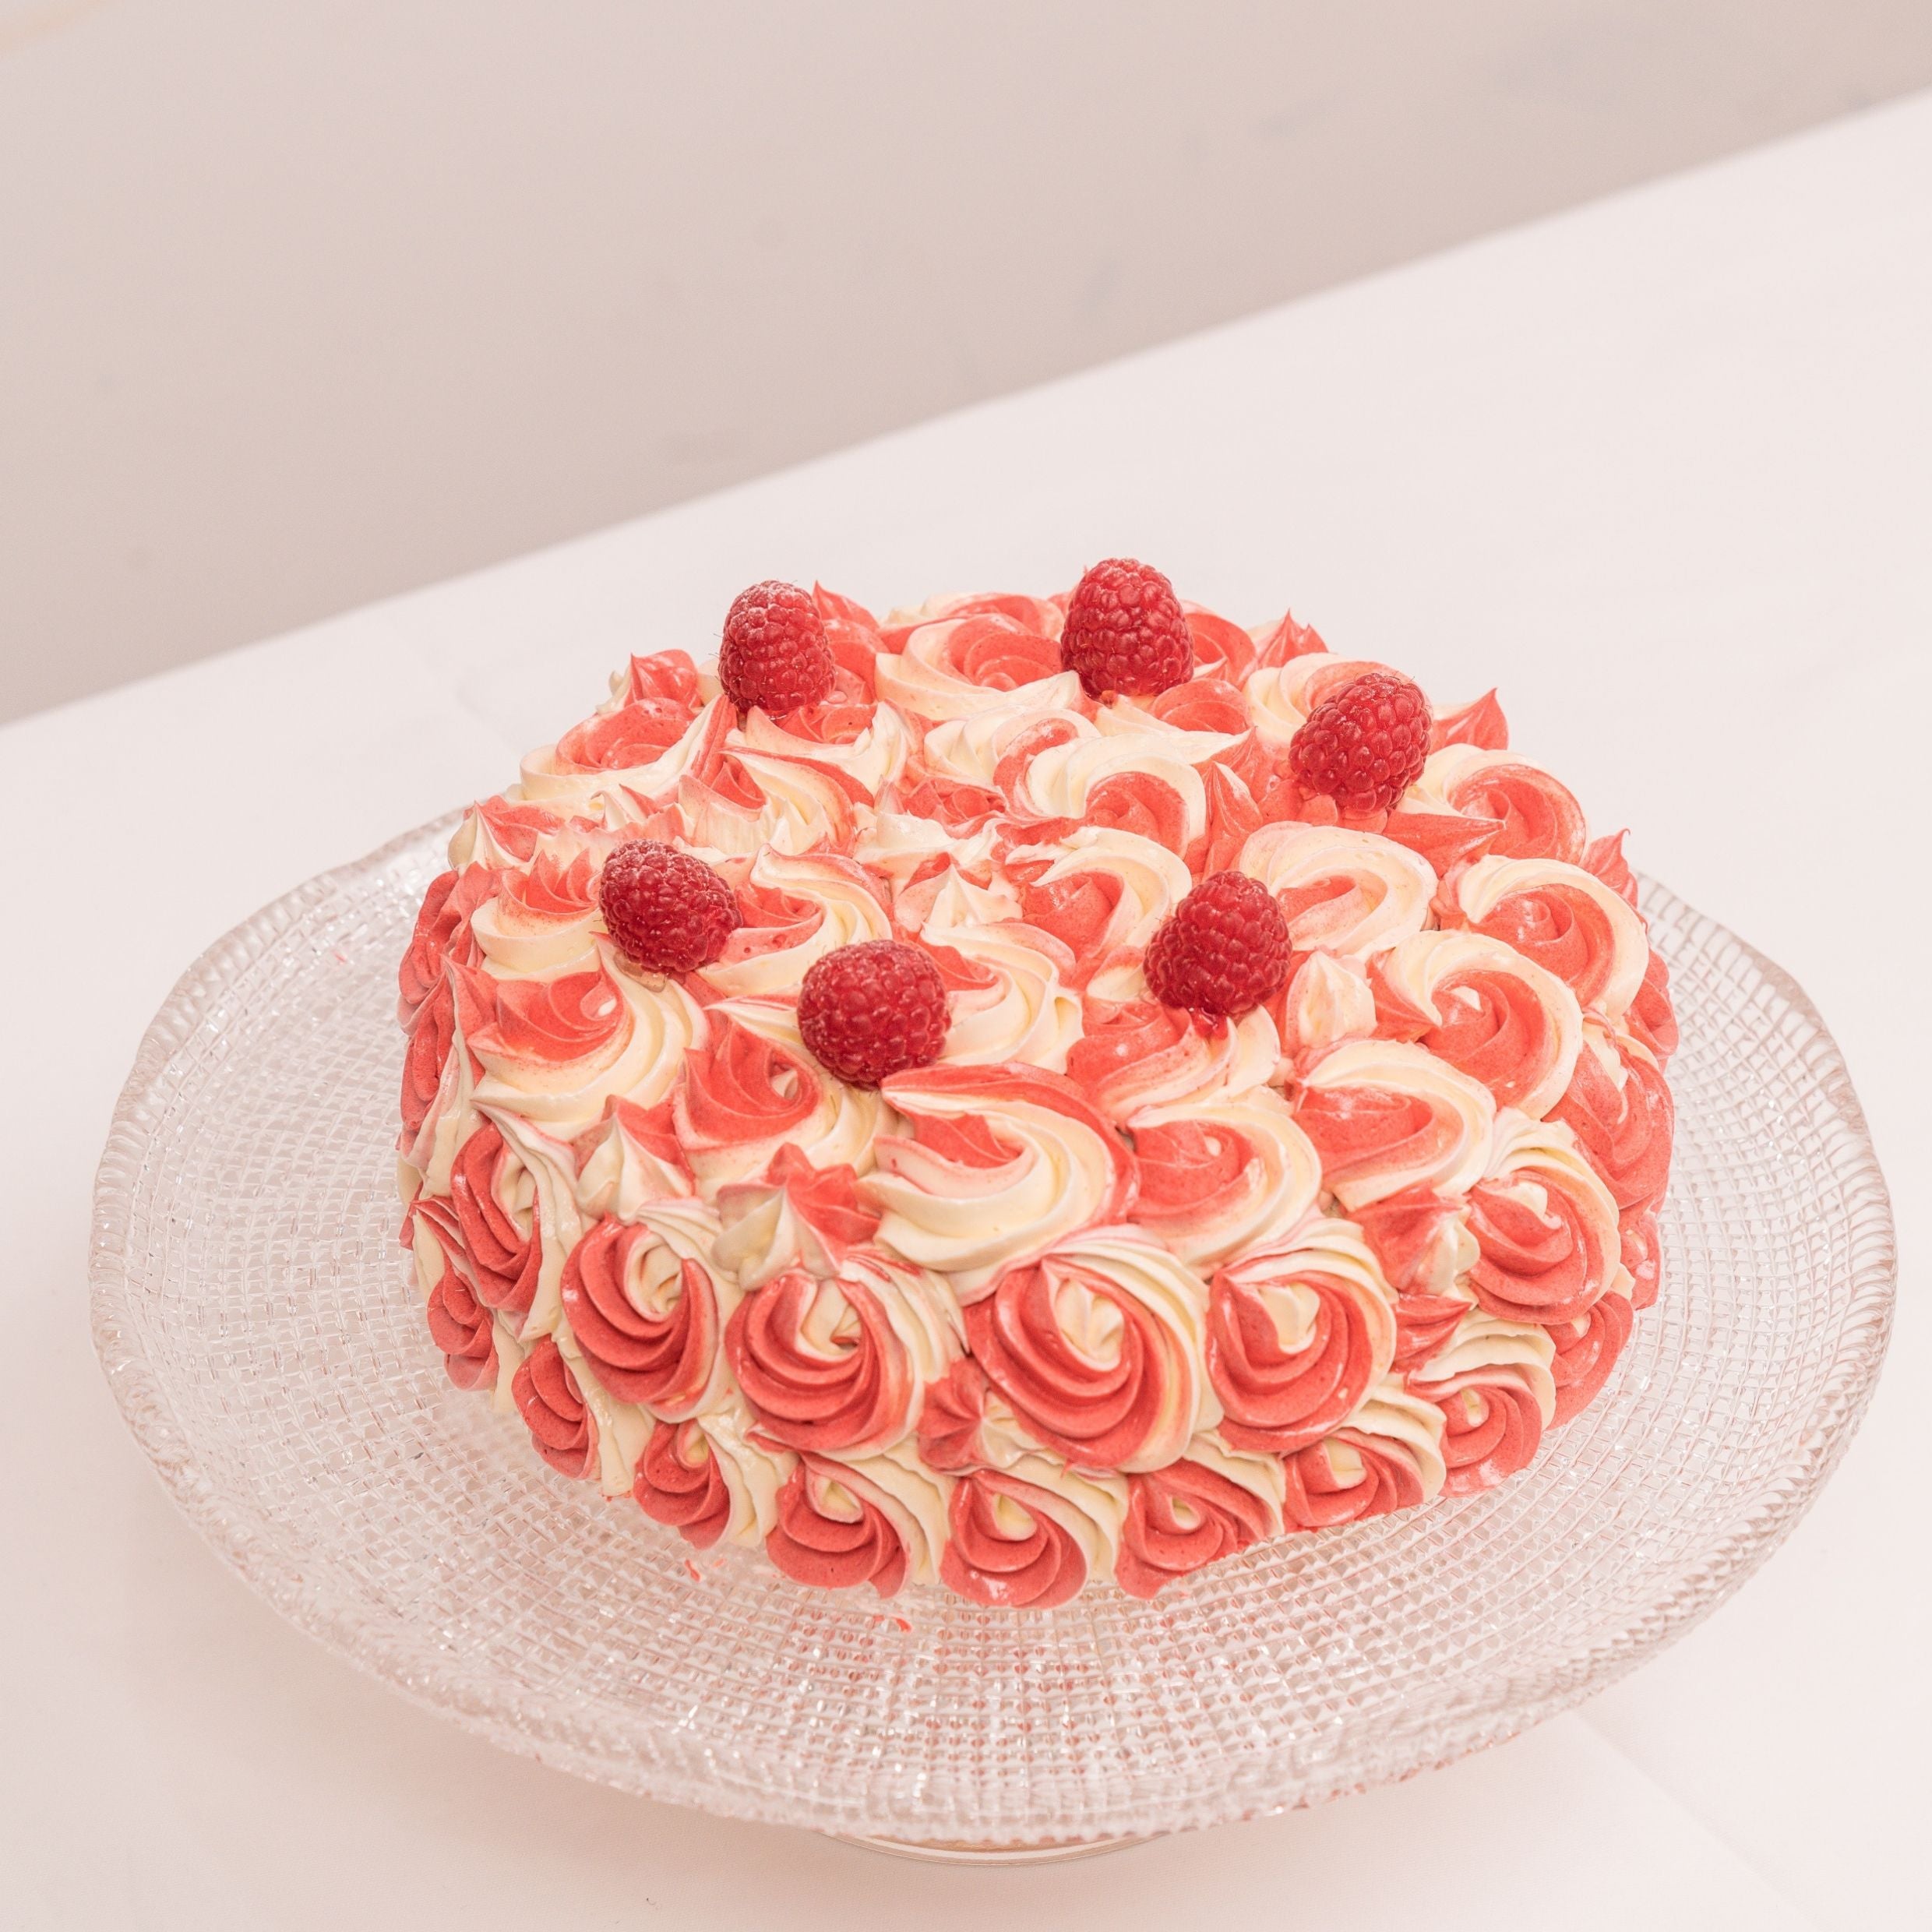 Lychee Strawberry Cake | Cake Delivery in KL - YuBake